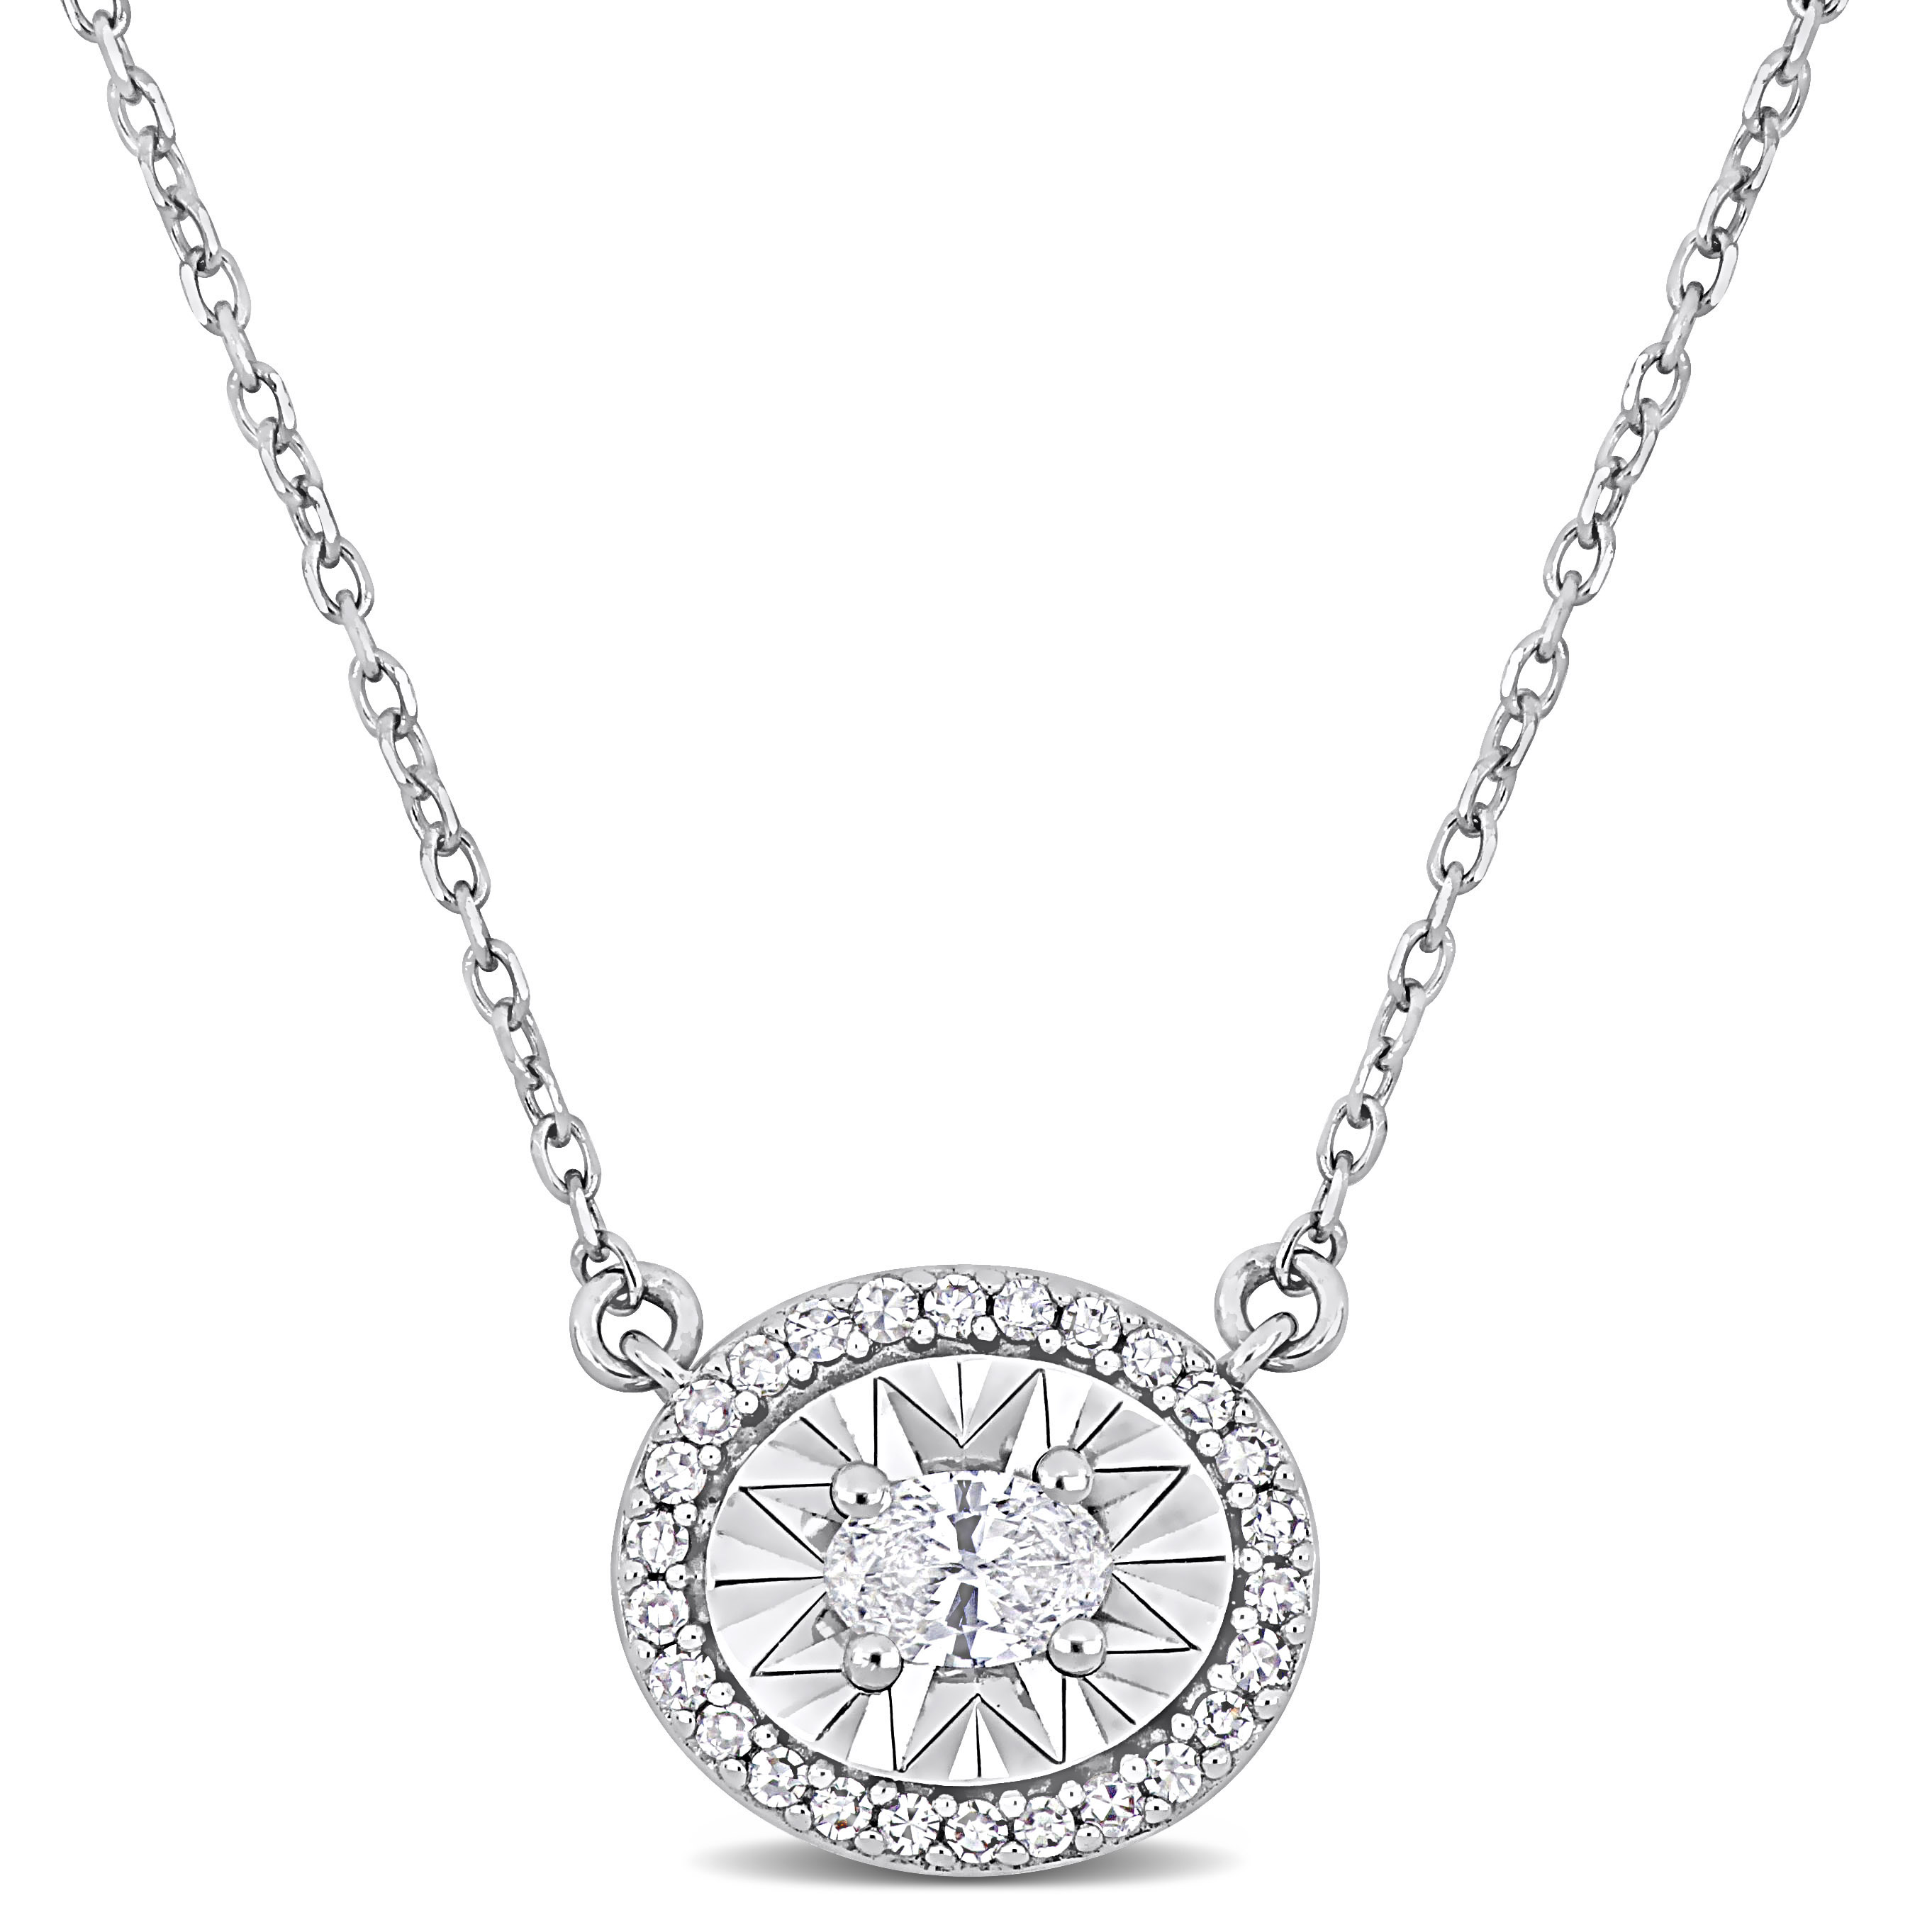 1/4 CT TDW Oval-Cut Diamond Halo Necklace in 14k White Gold - 16 in.